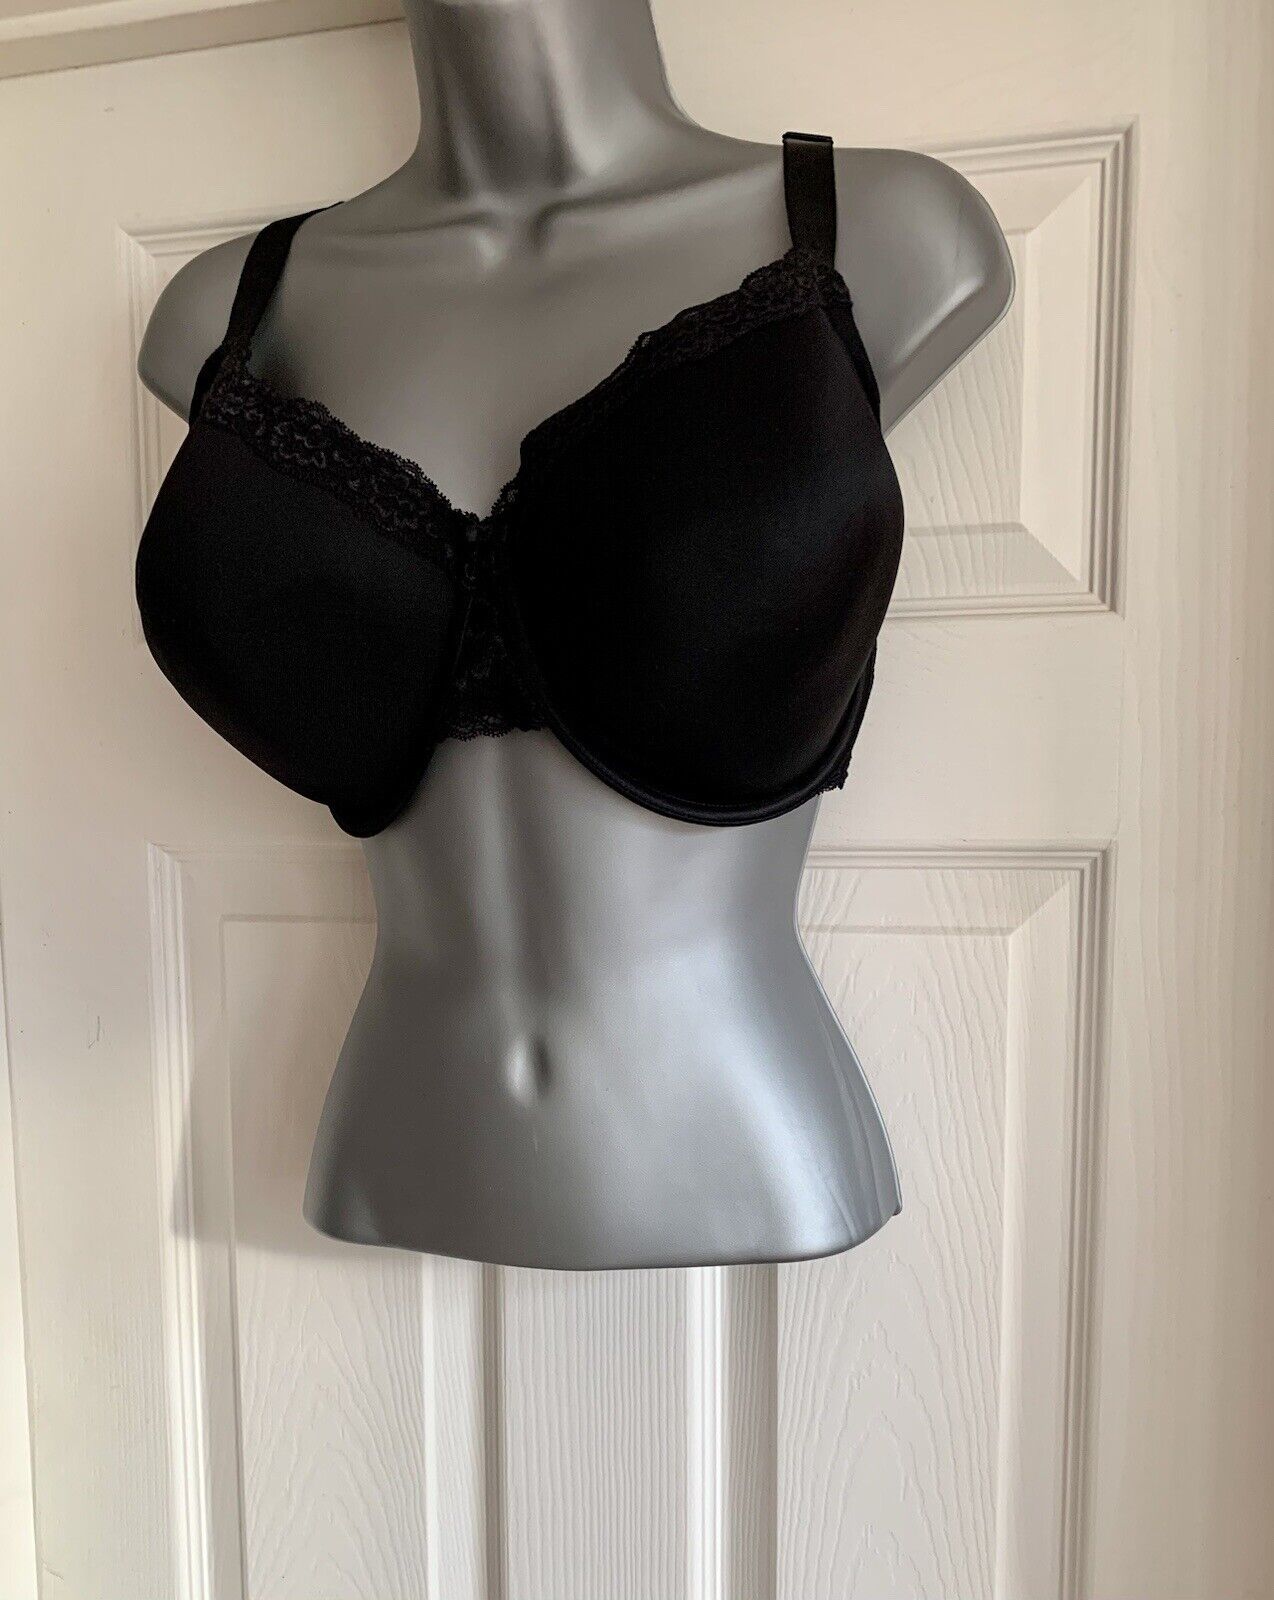 M&S ROSIE Floral Embroidered Non-Padded Balcony Bra Size UK 36B - EUR 80B -  NEW 5000024361427 on eBid United States | 206524072